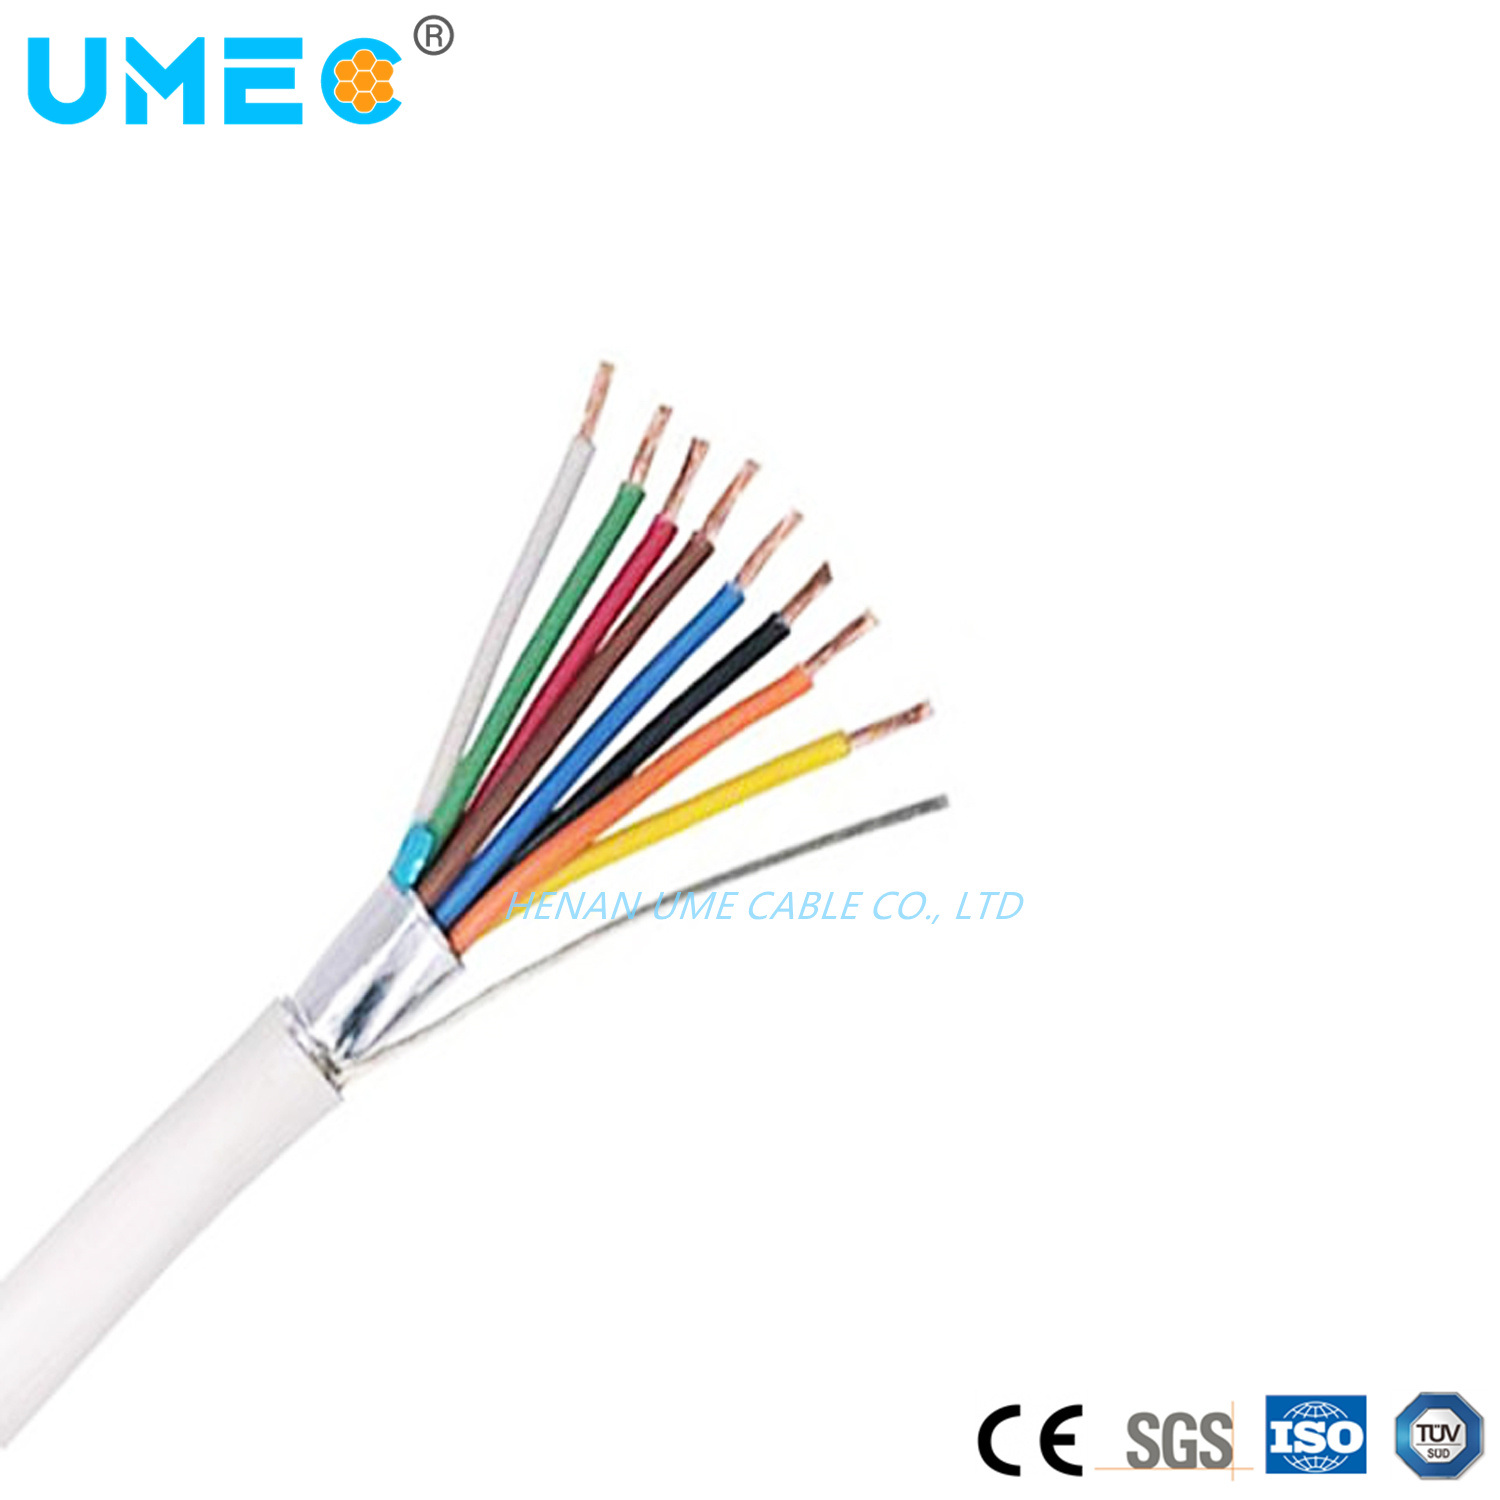 Low Voltage 300V Communication Computer Cable Copper Wire PVC Sheath Cable Connection Soft Computer Cable